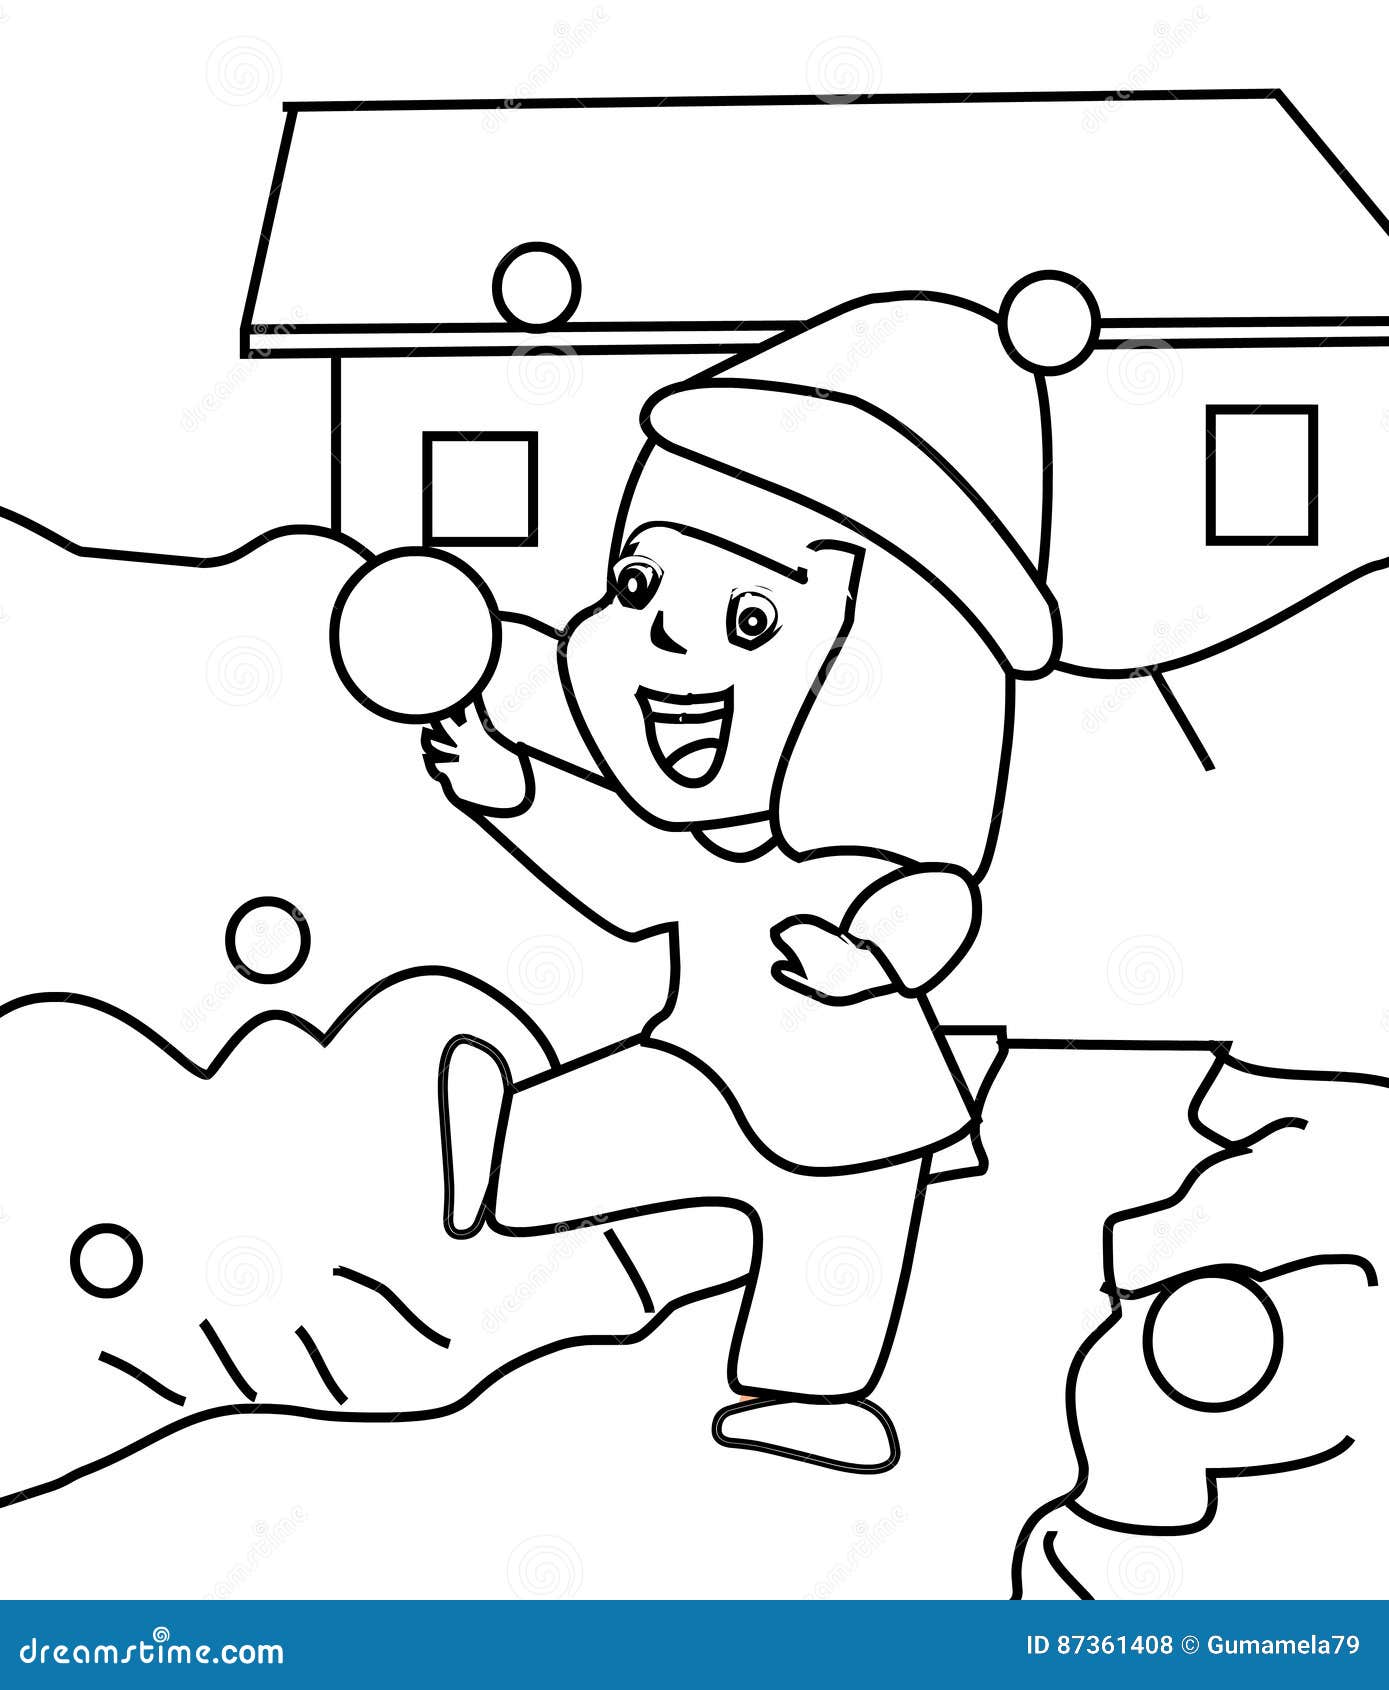 Little Girl Playing in Snow Coloring Page Stock Illustration